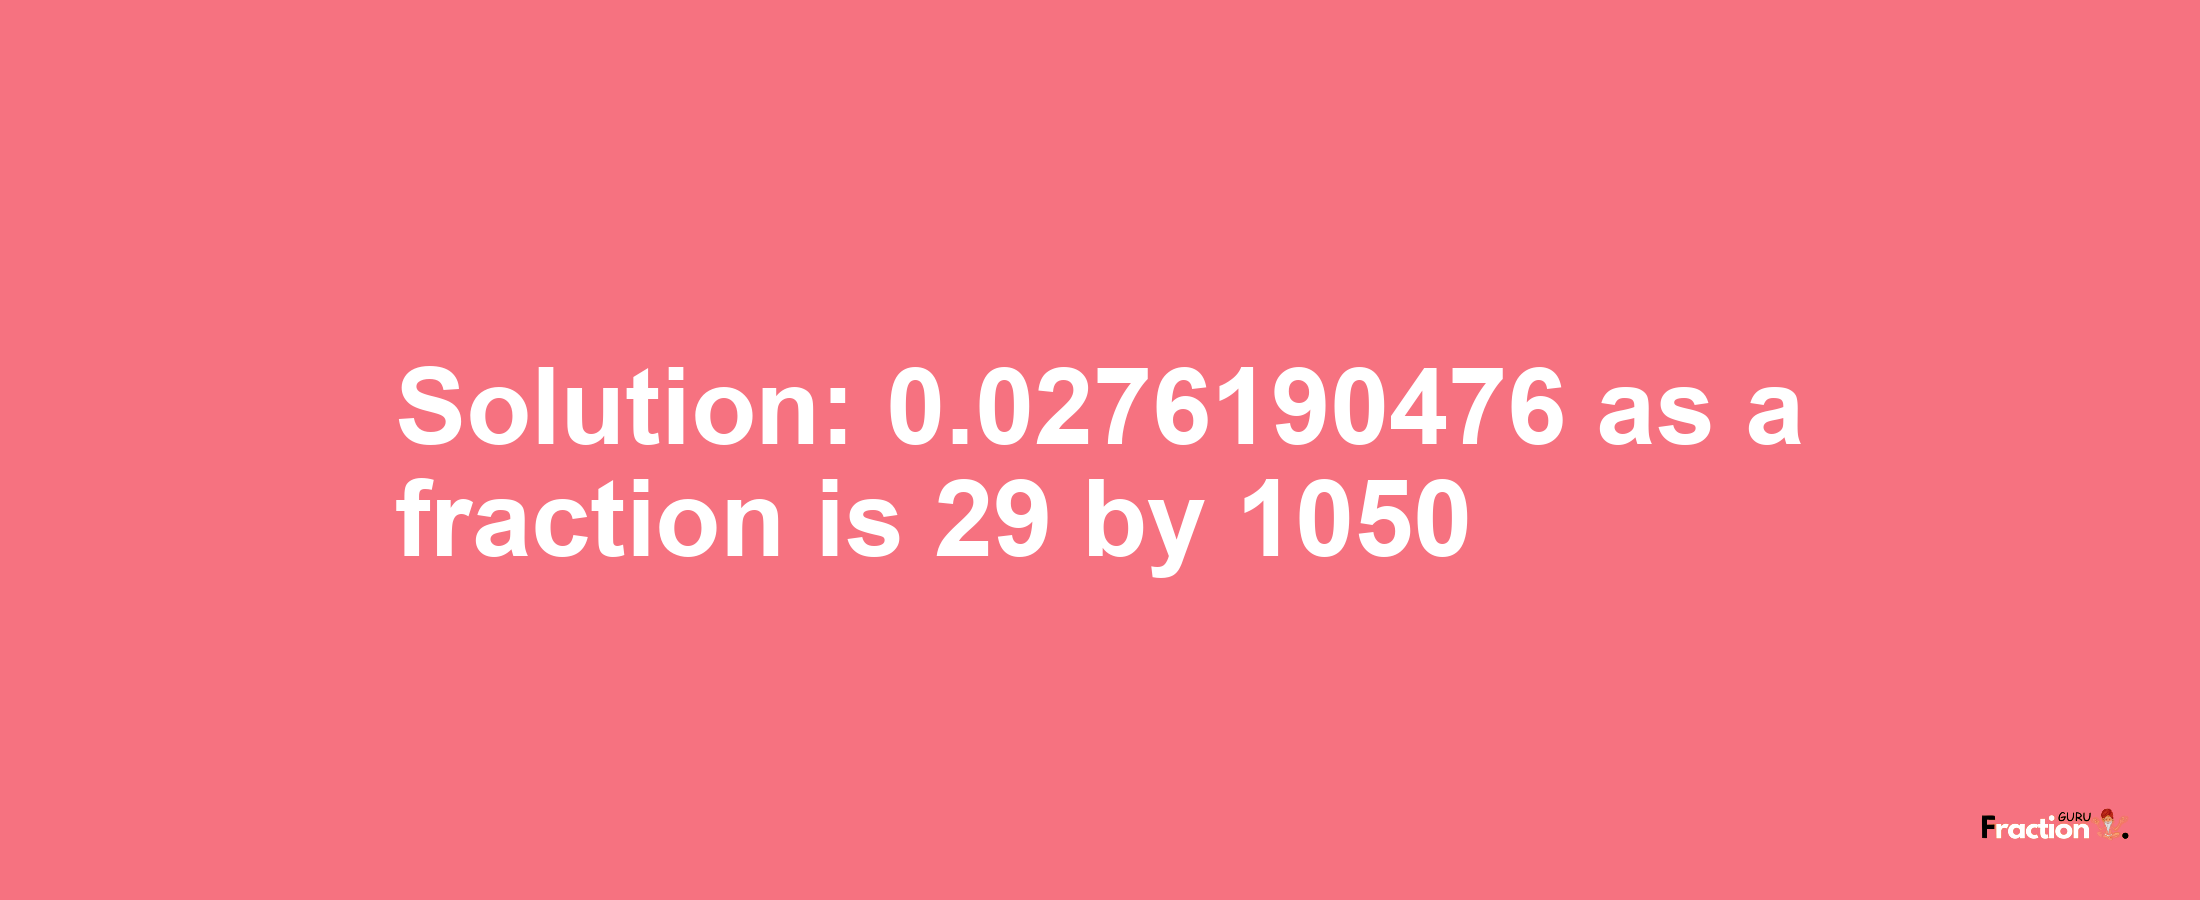 Solution:0.0276190476 as a fraction is 29/1050